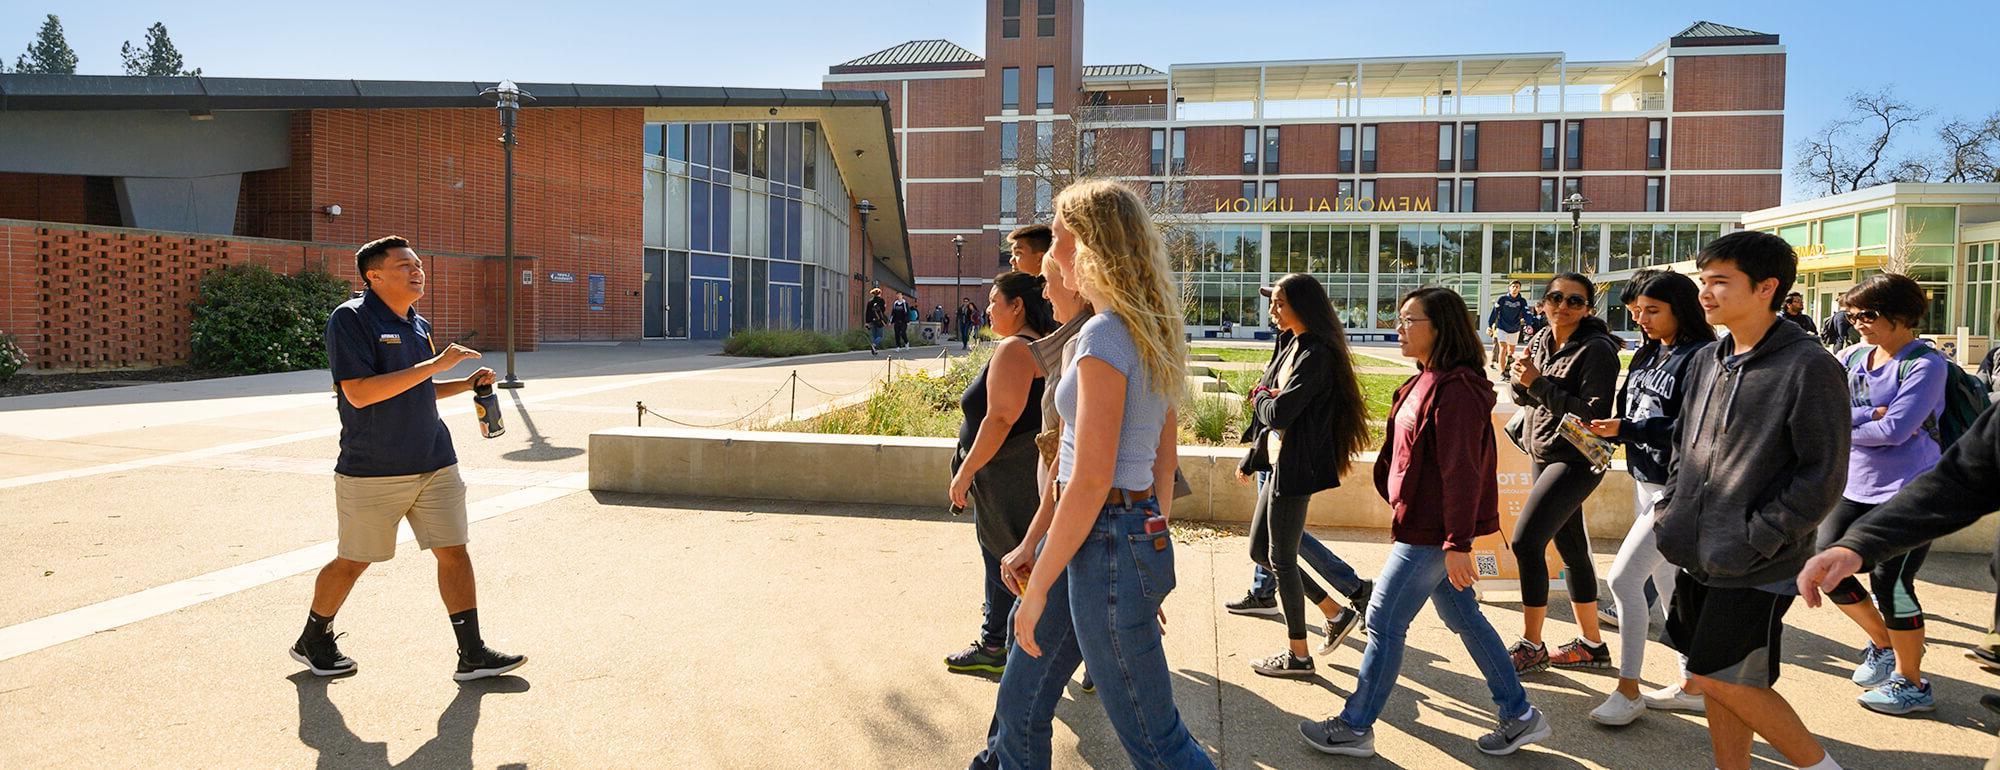 A UC Davis tour guide walks backward through campus highliting campus sights to his audience